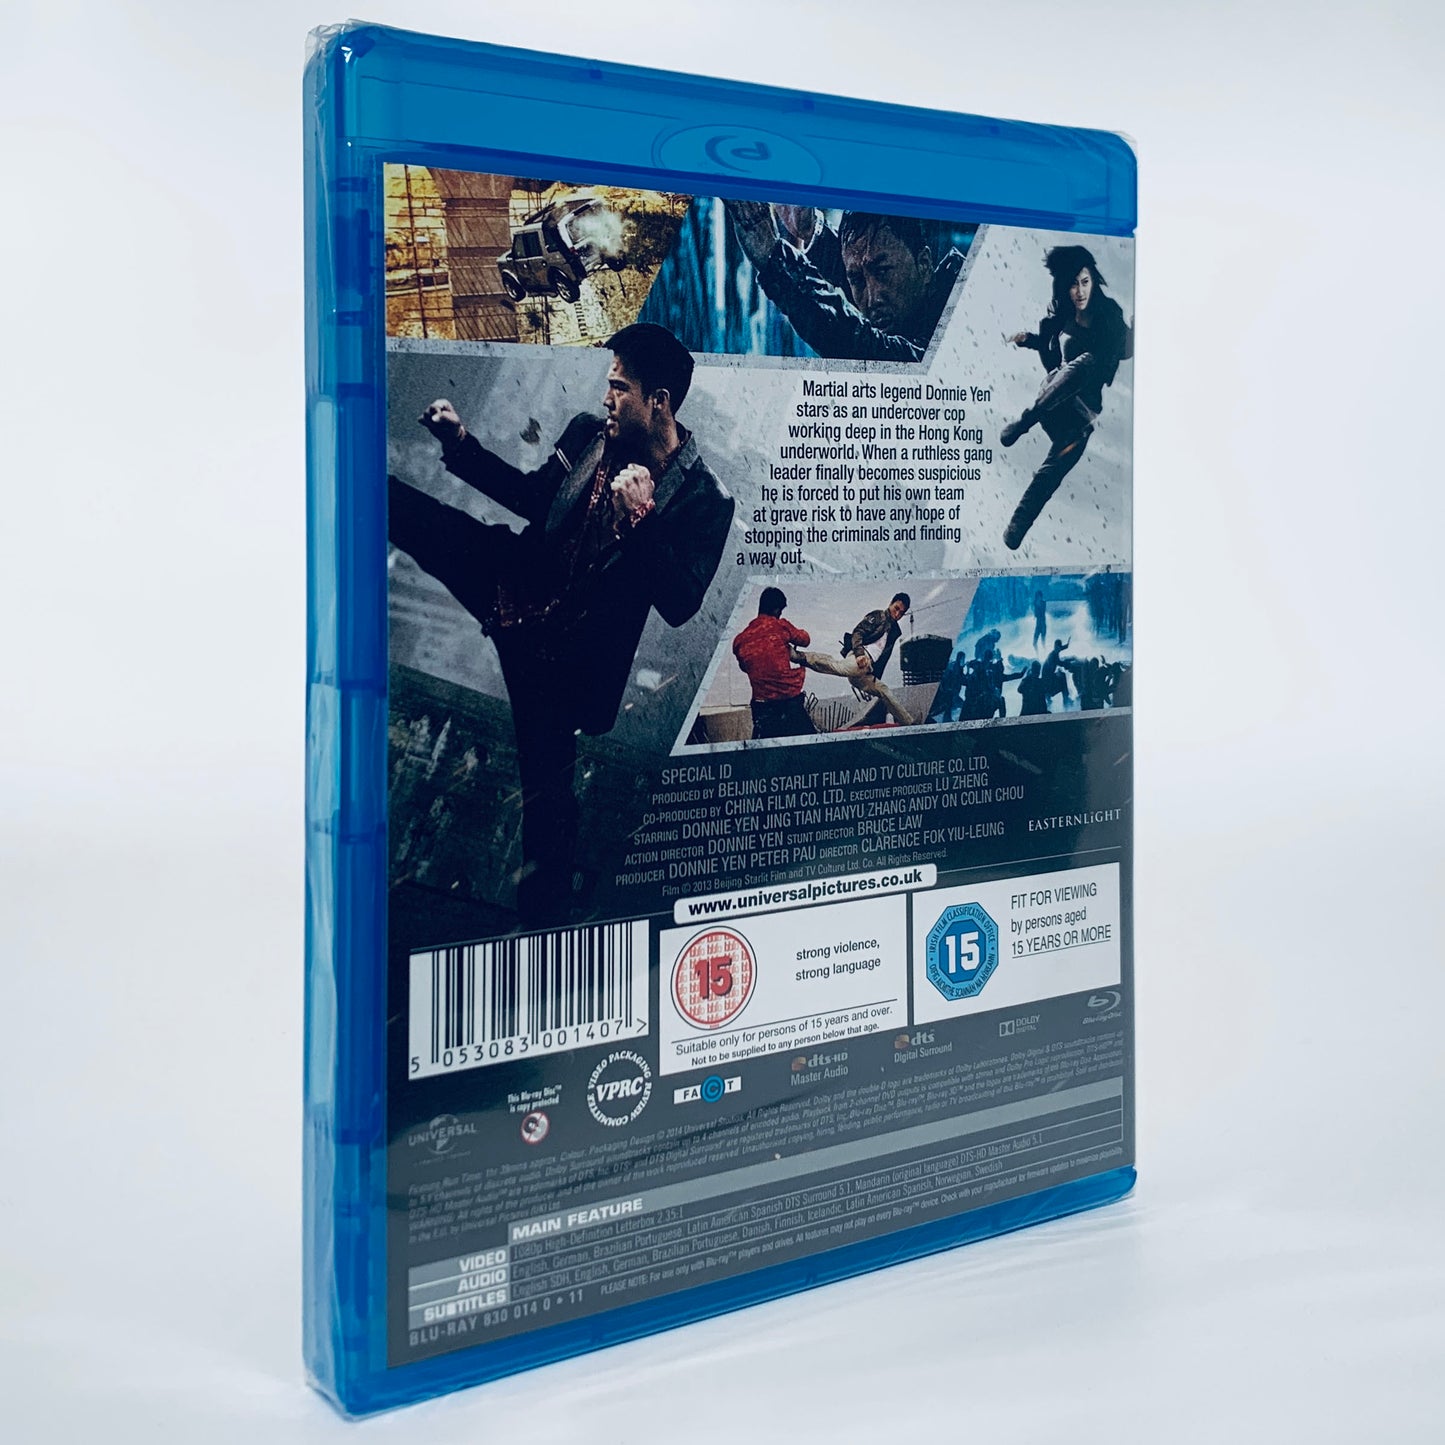 Special ID I.D. Donnie Yen Andy On Clarence Fok All Regon Blu-ray Cine Asia UK